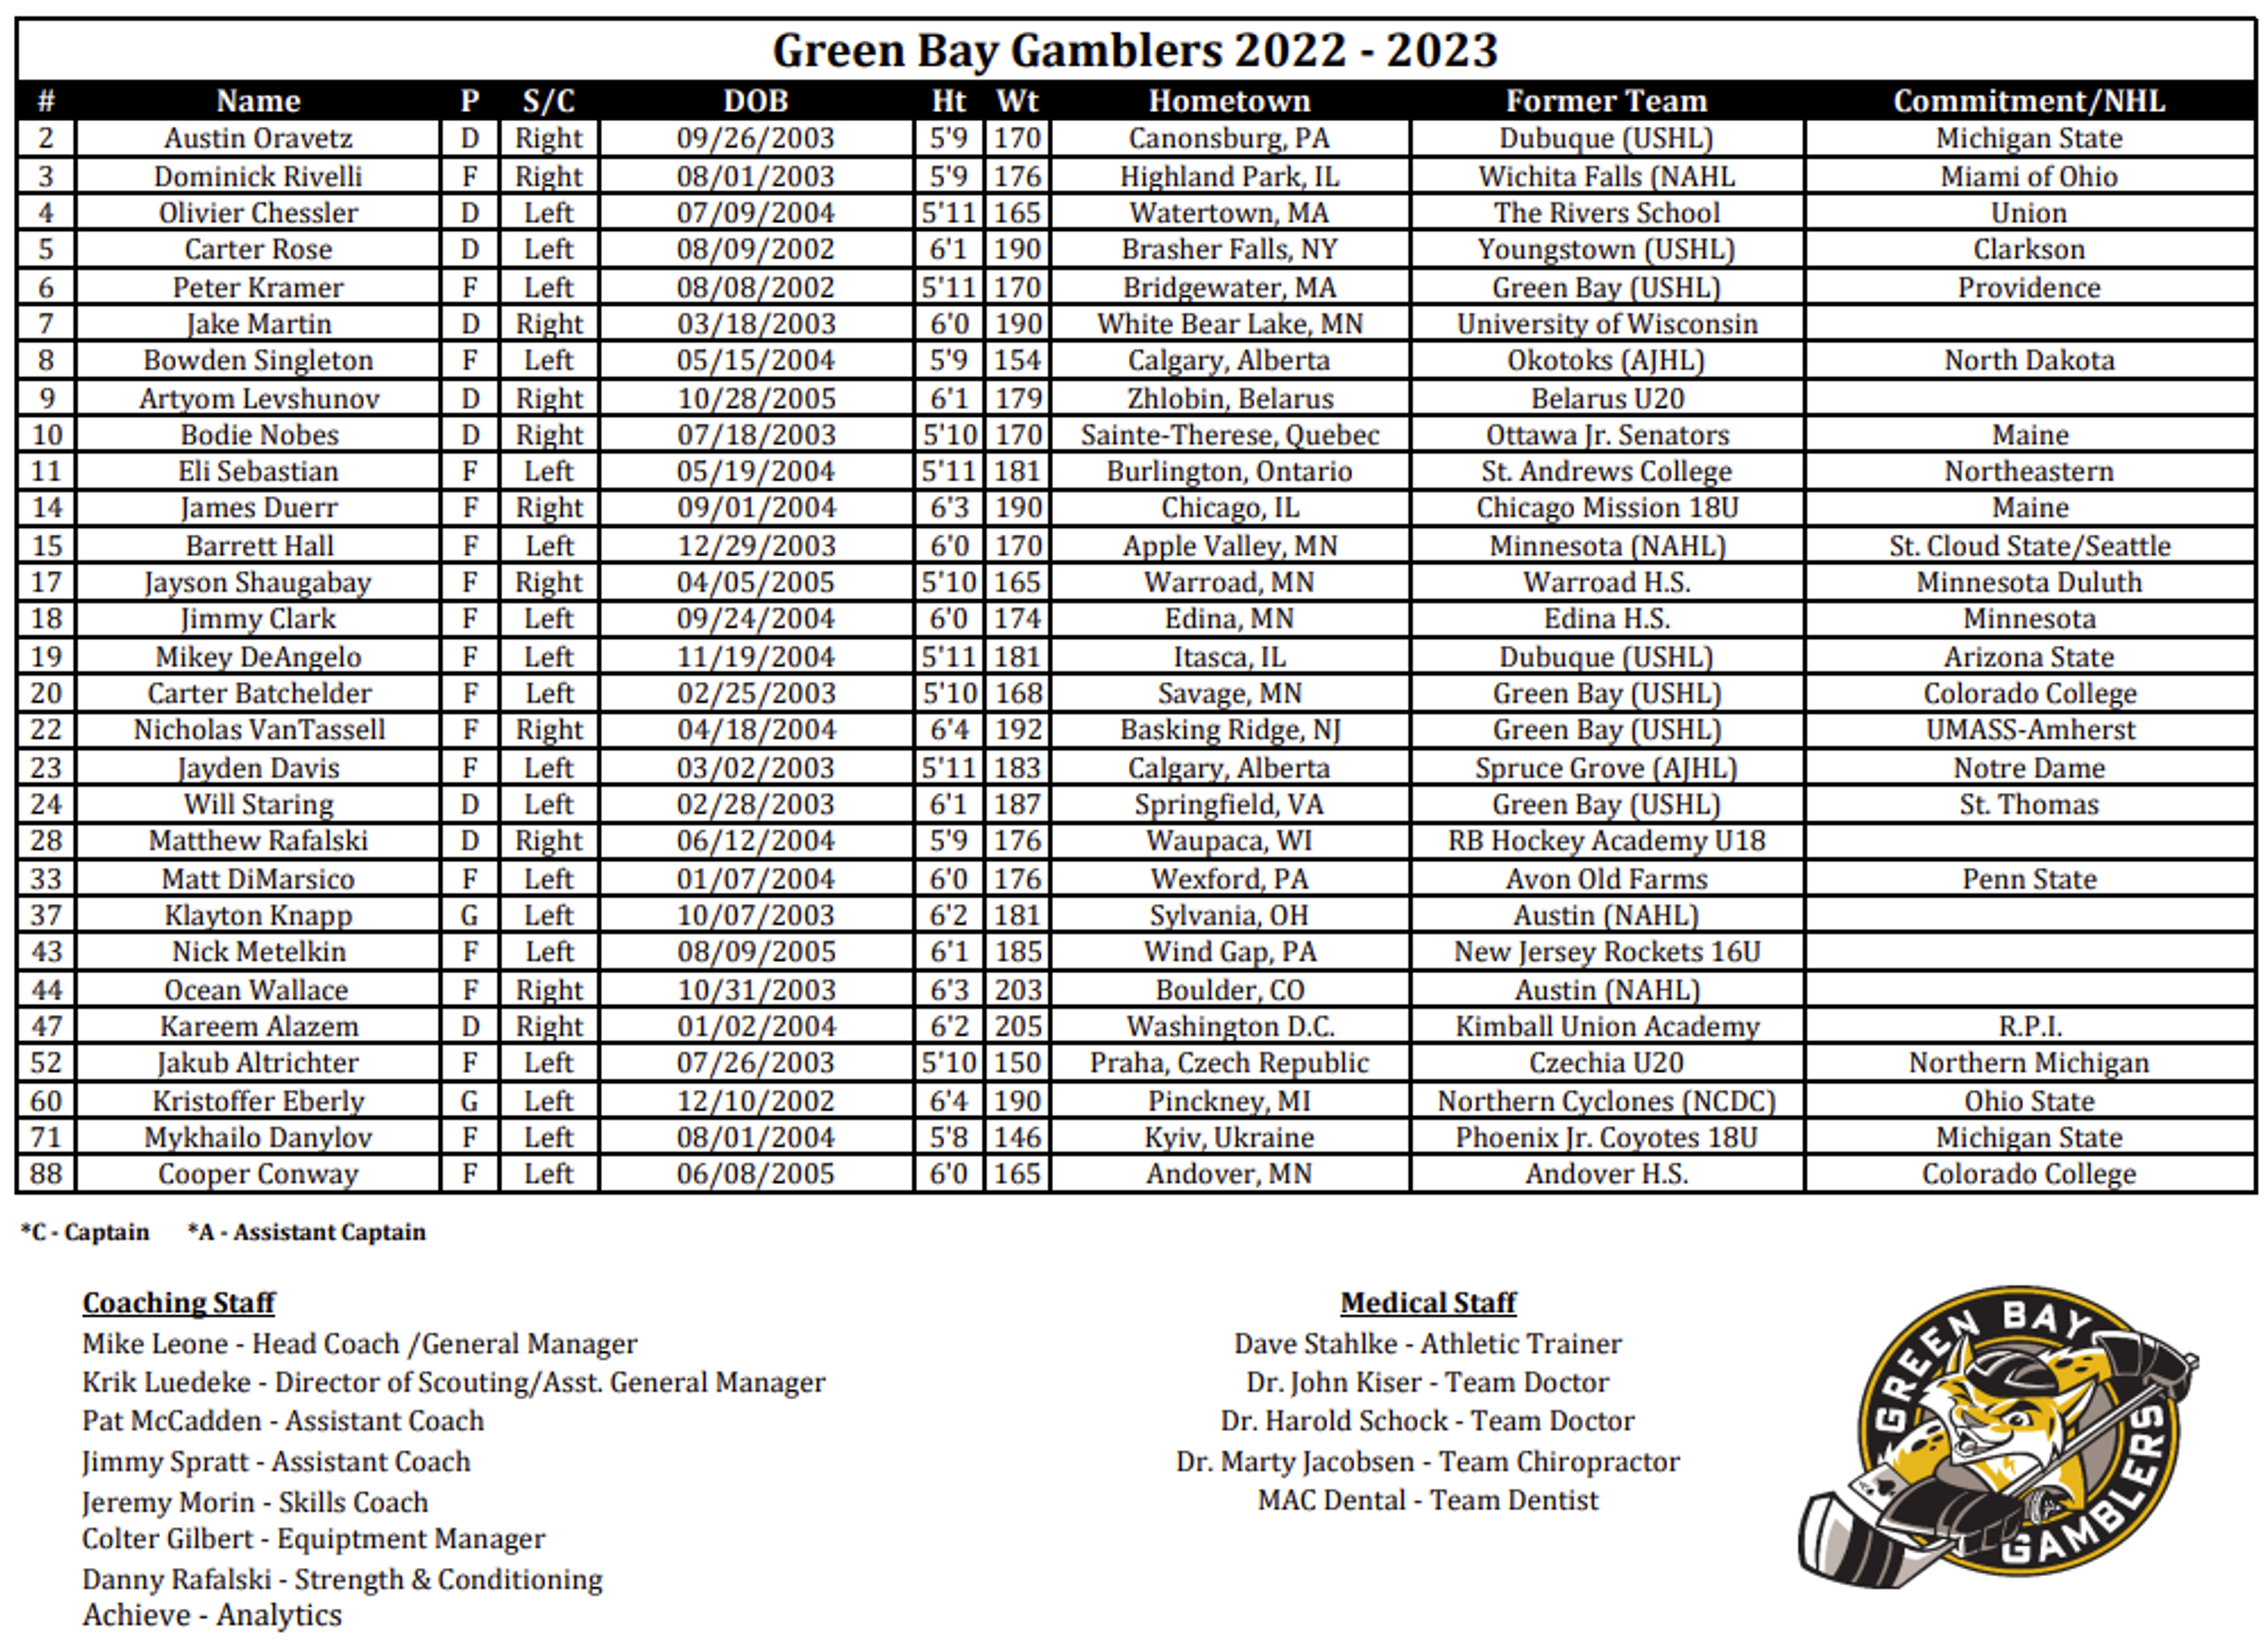 Bruins announce 2023 training camp roster